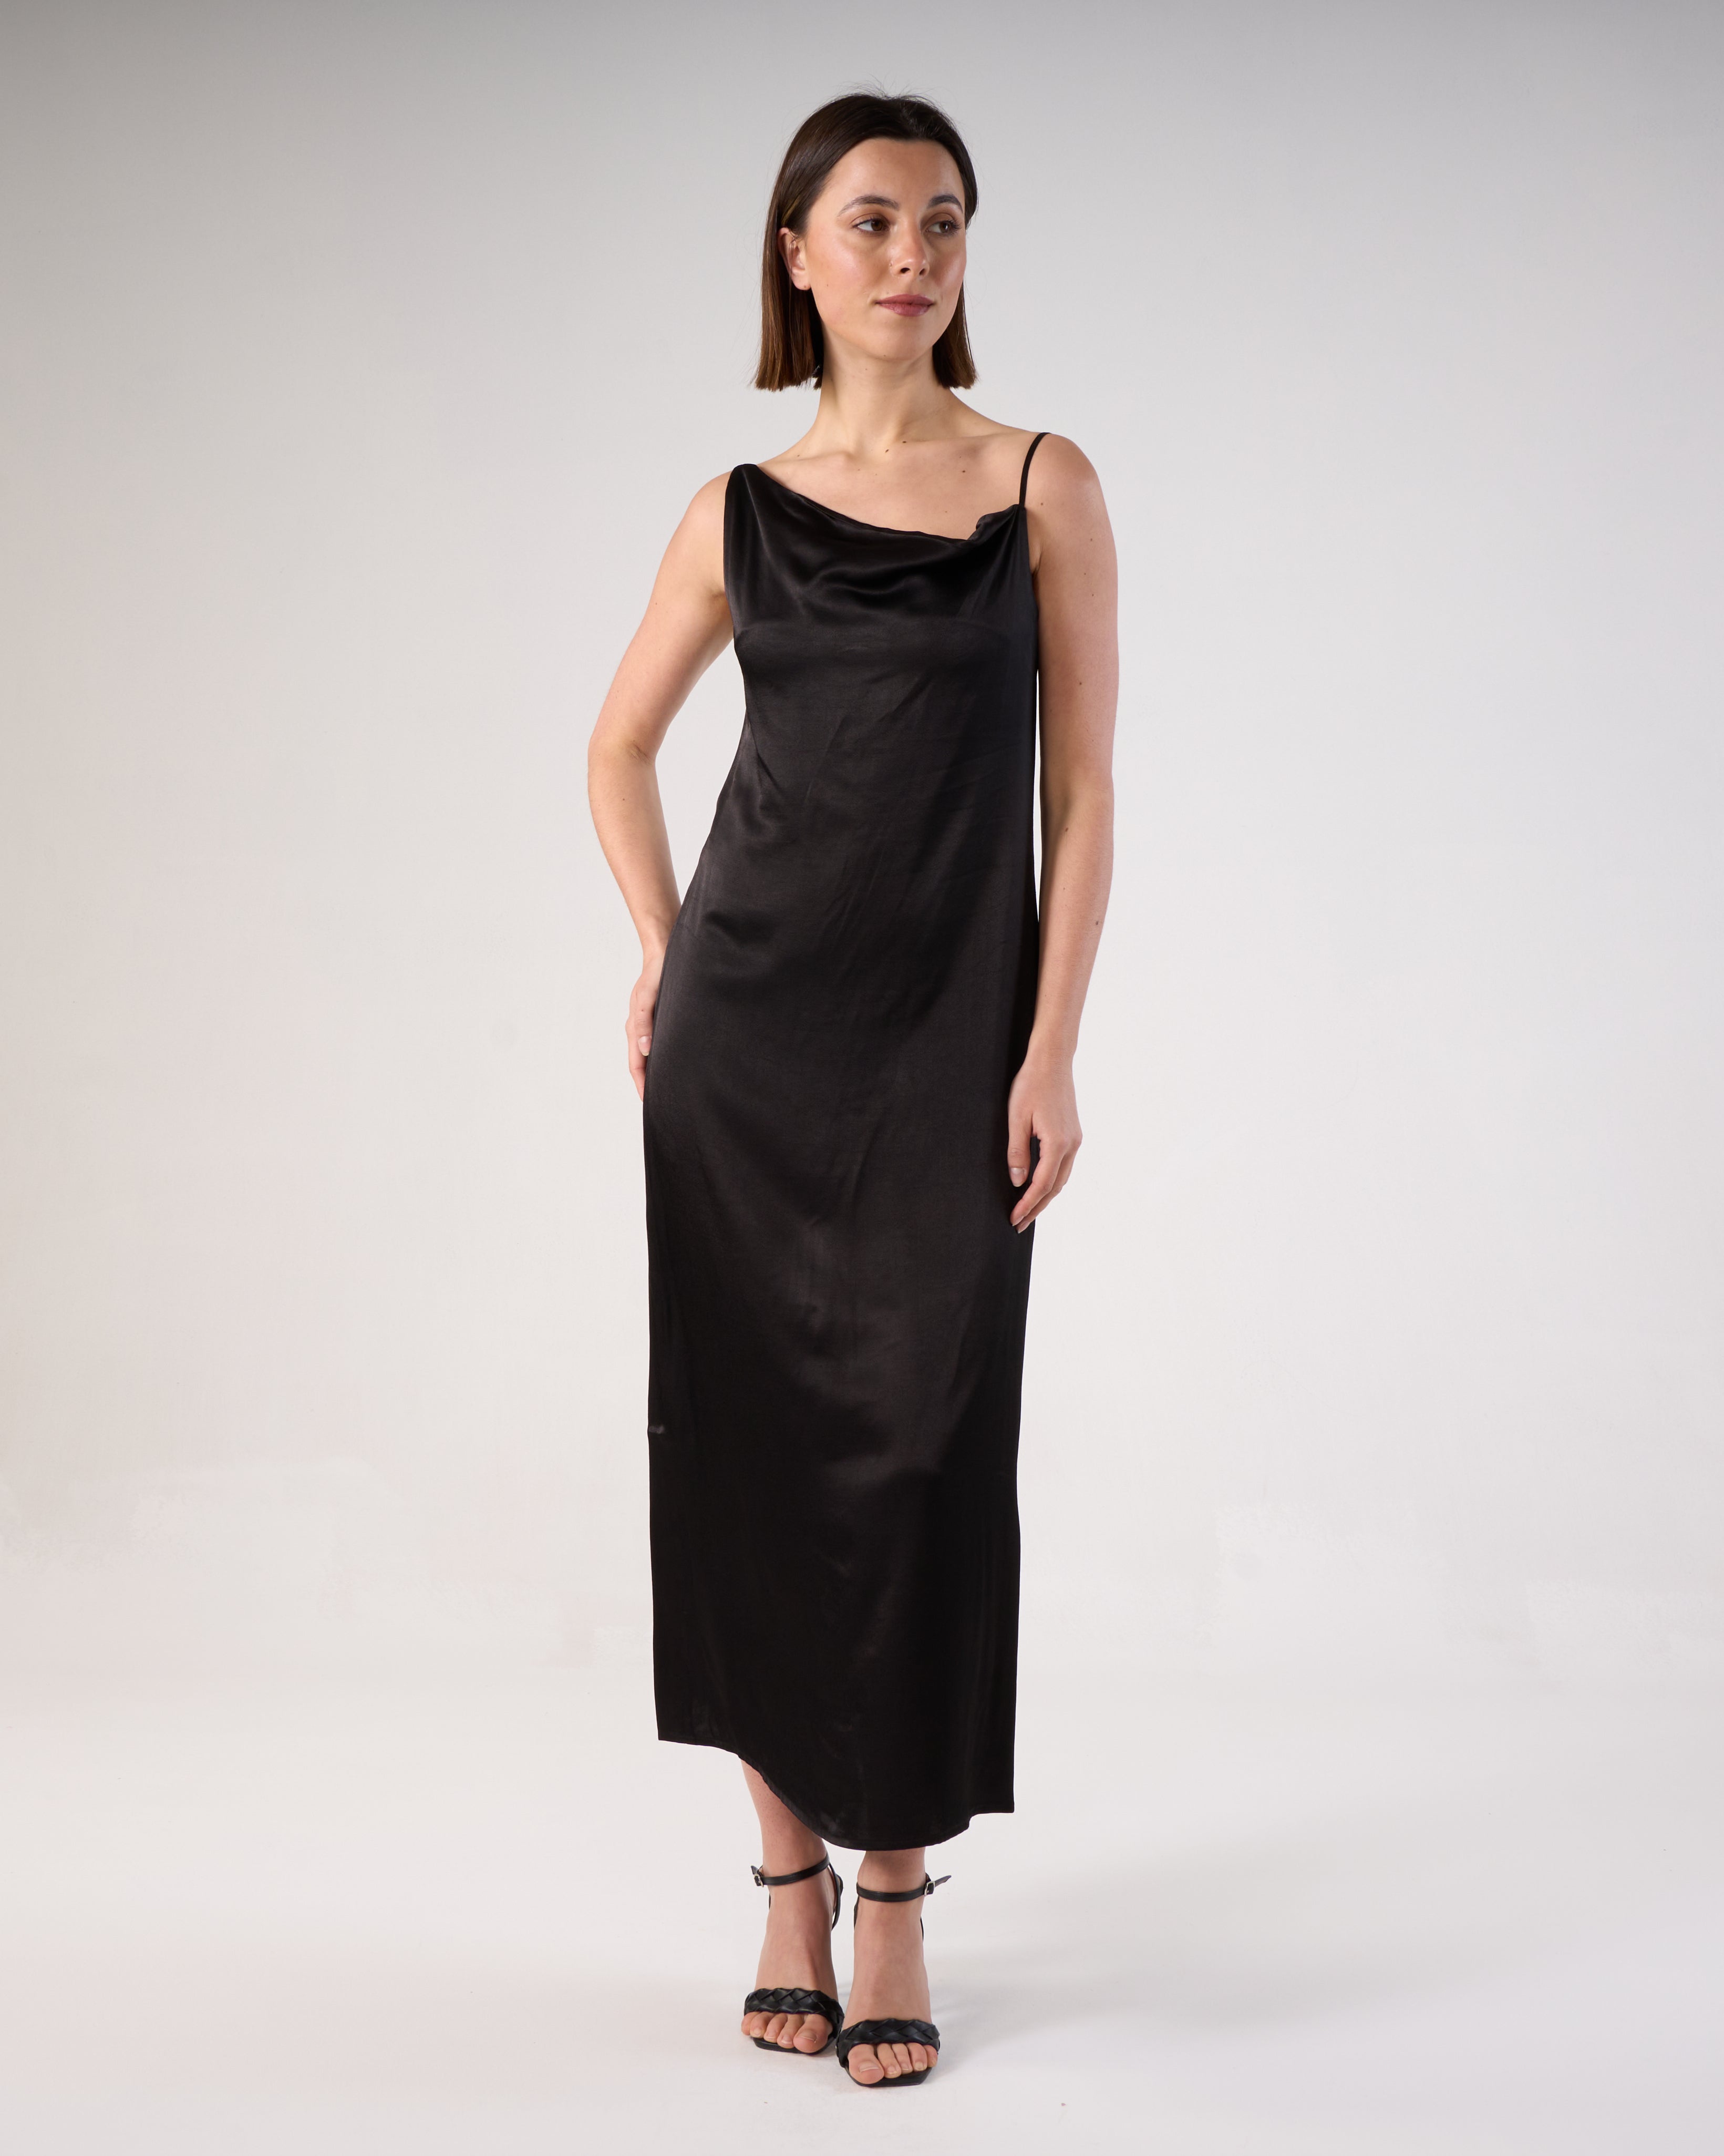 Elvira Silk Dress Embrace Open, Sophisticated Semi-Fitted Style with Bias Cut